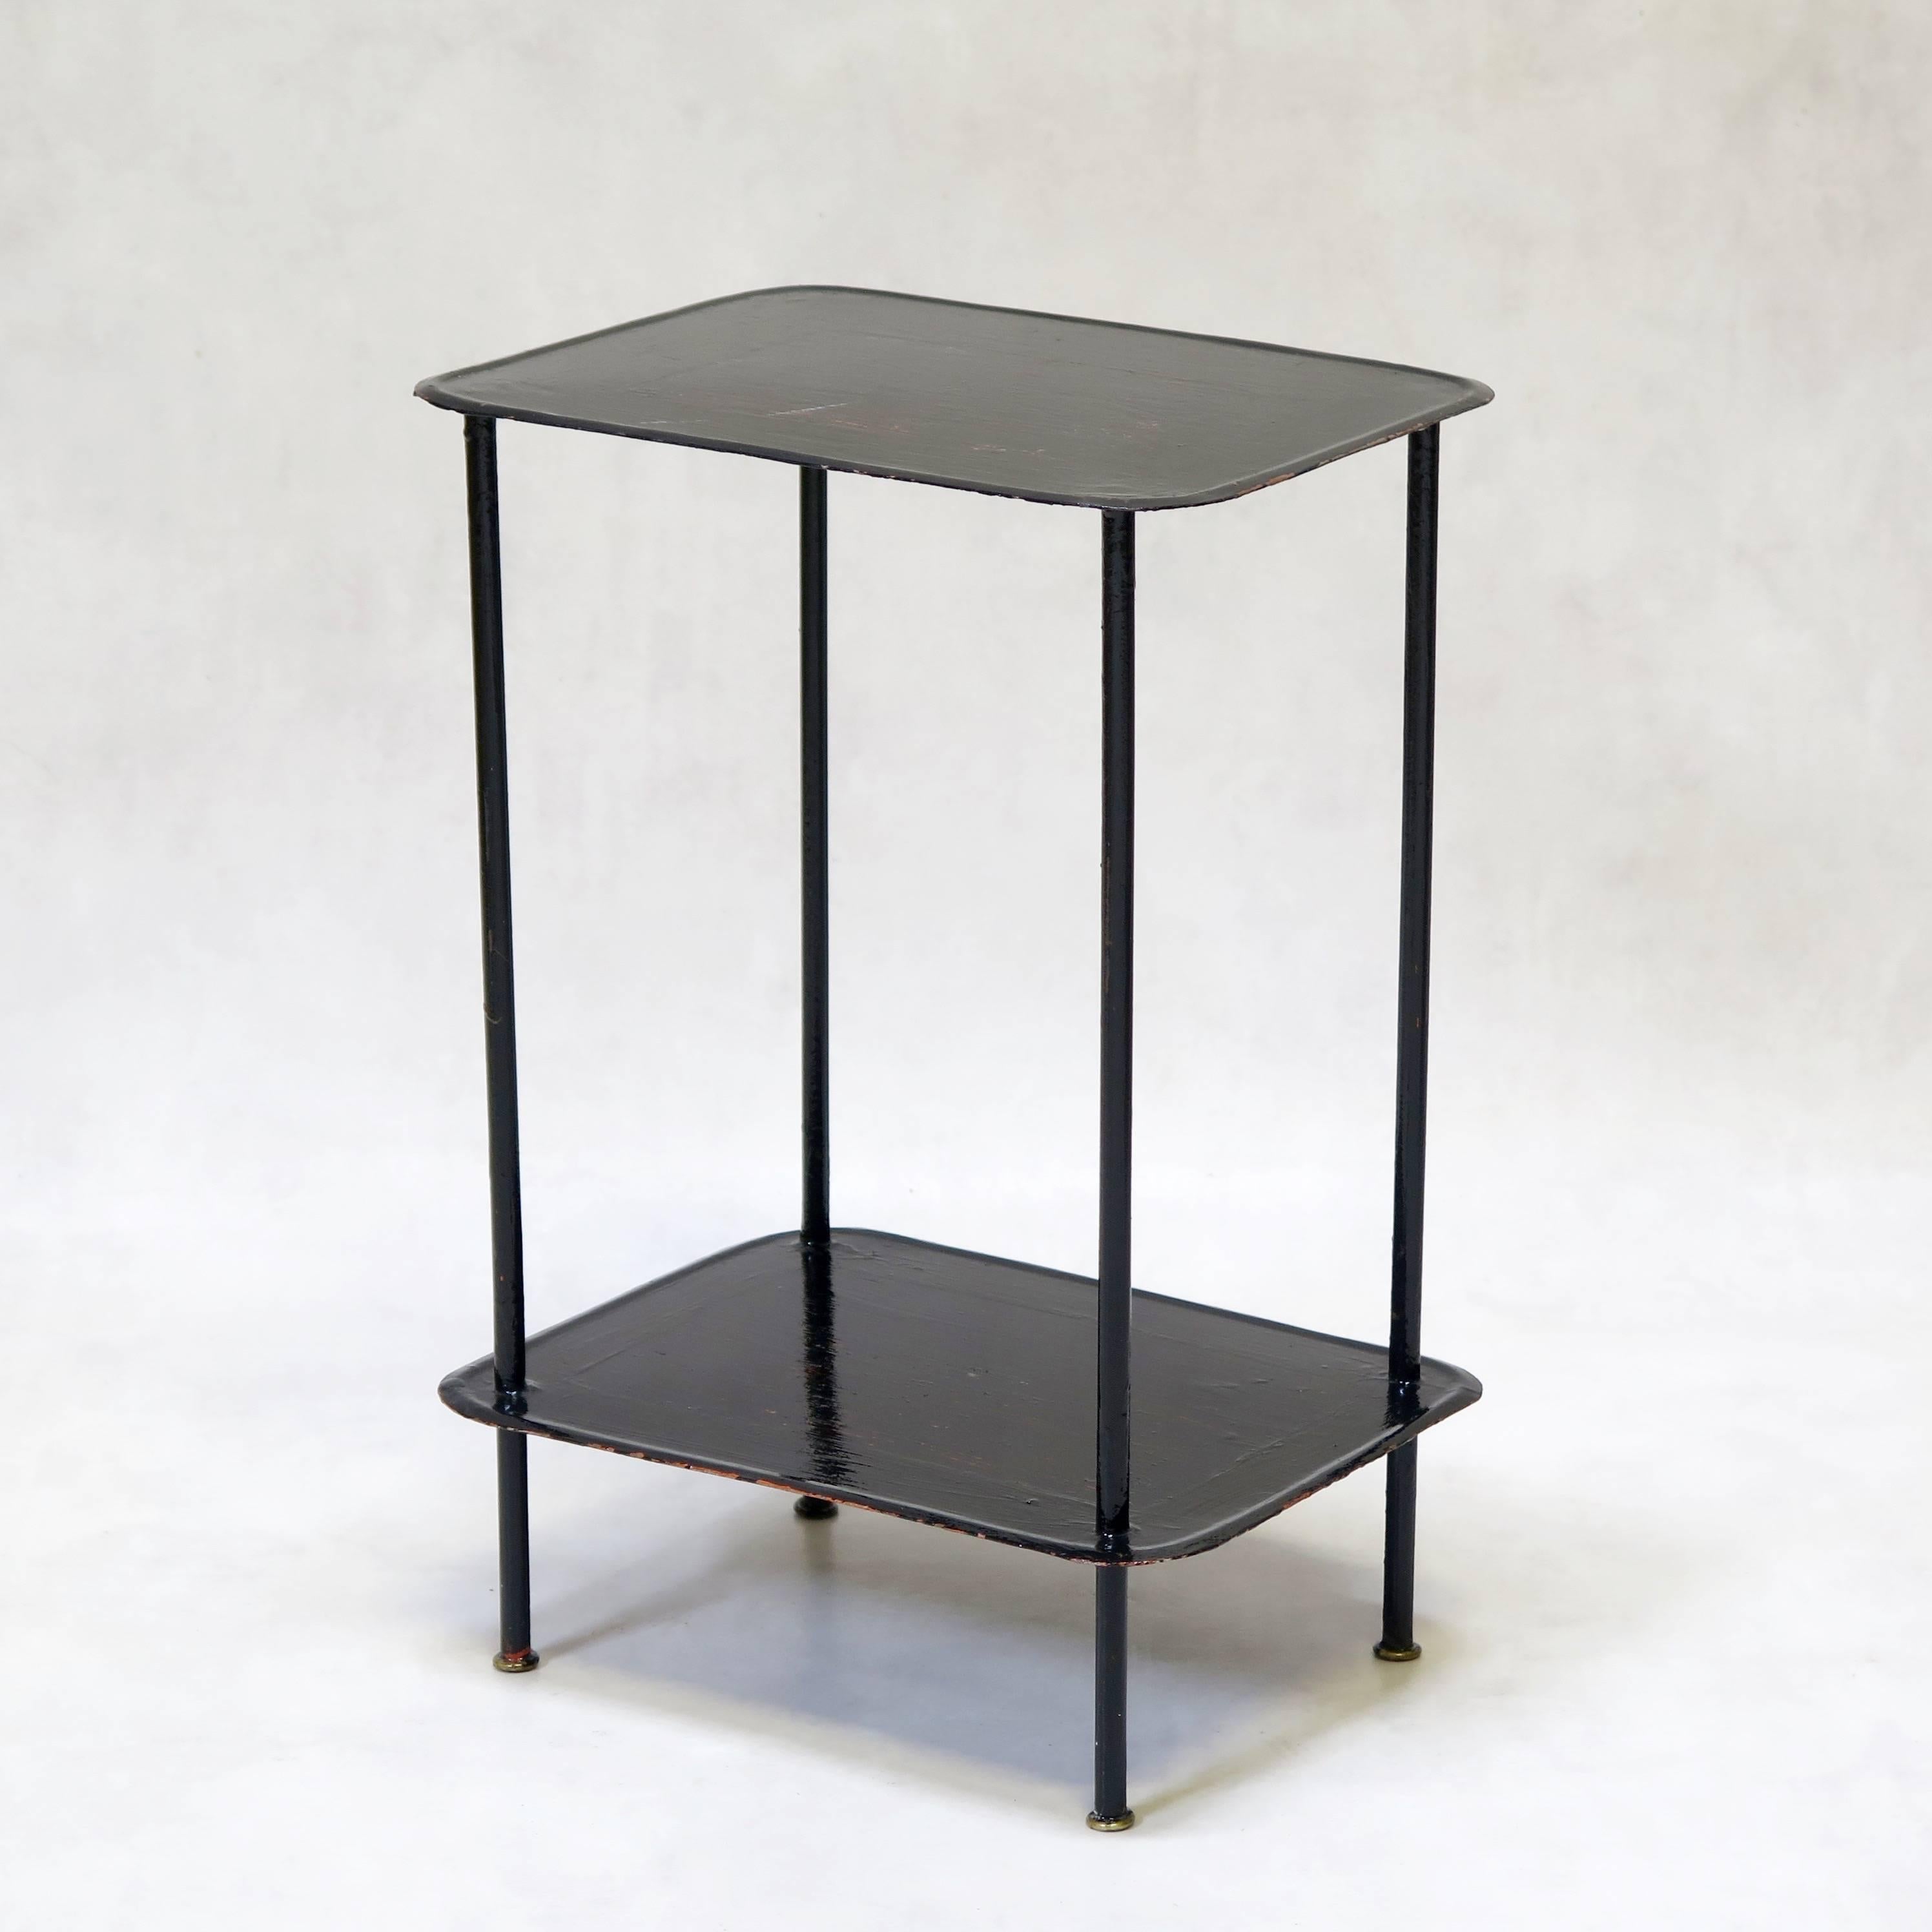 Four Black Painted Metal Tray Tables in the 1940s Style, France, circa 1960s For Sale 1